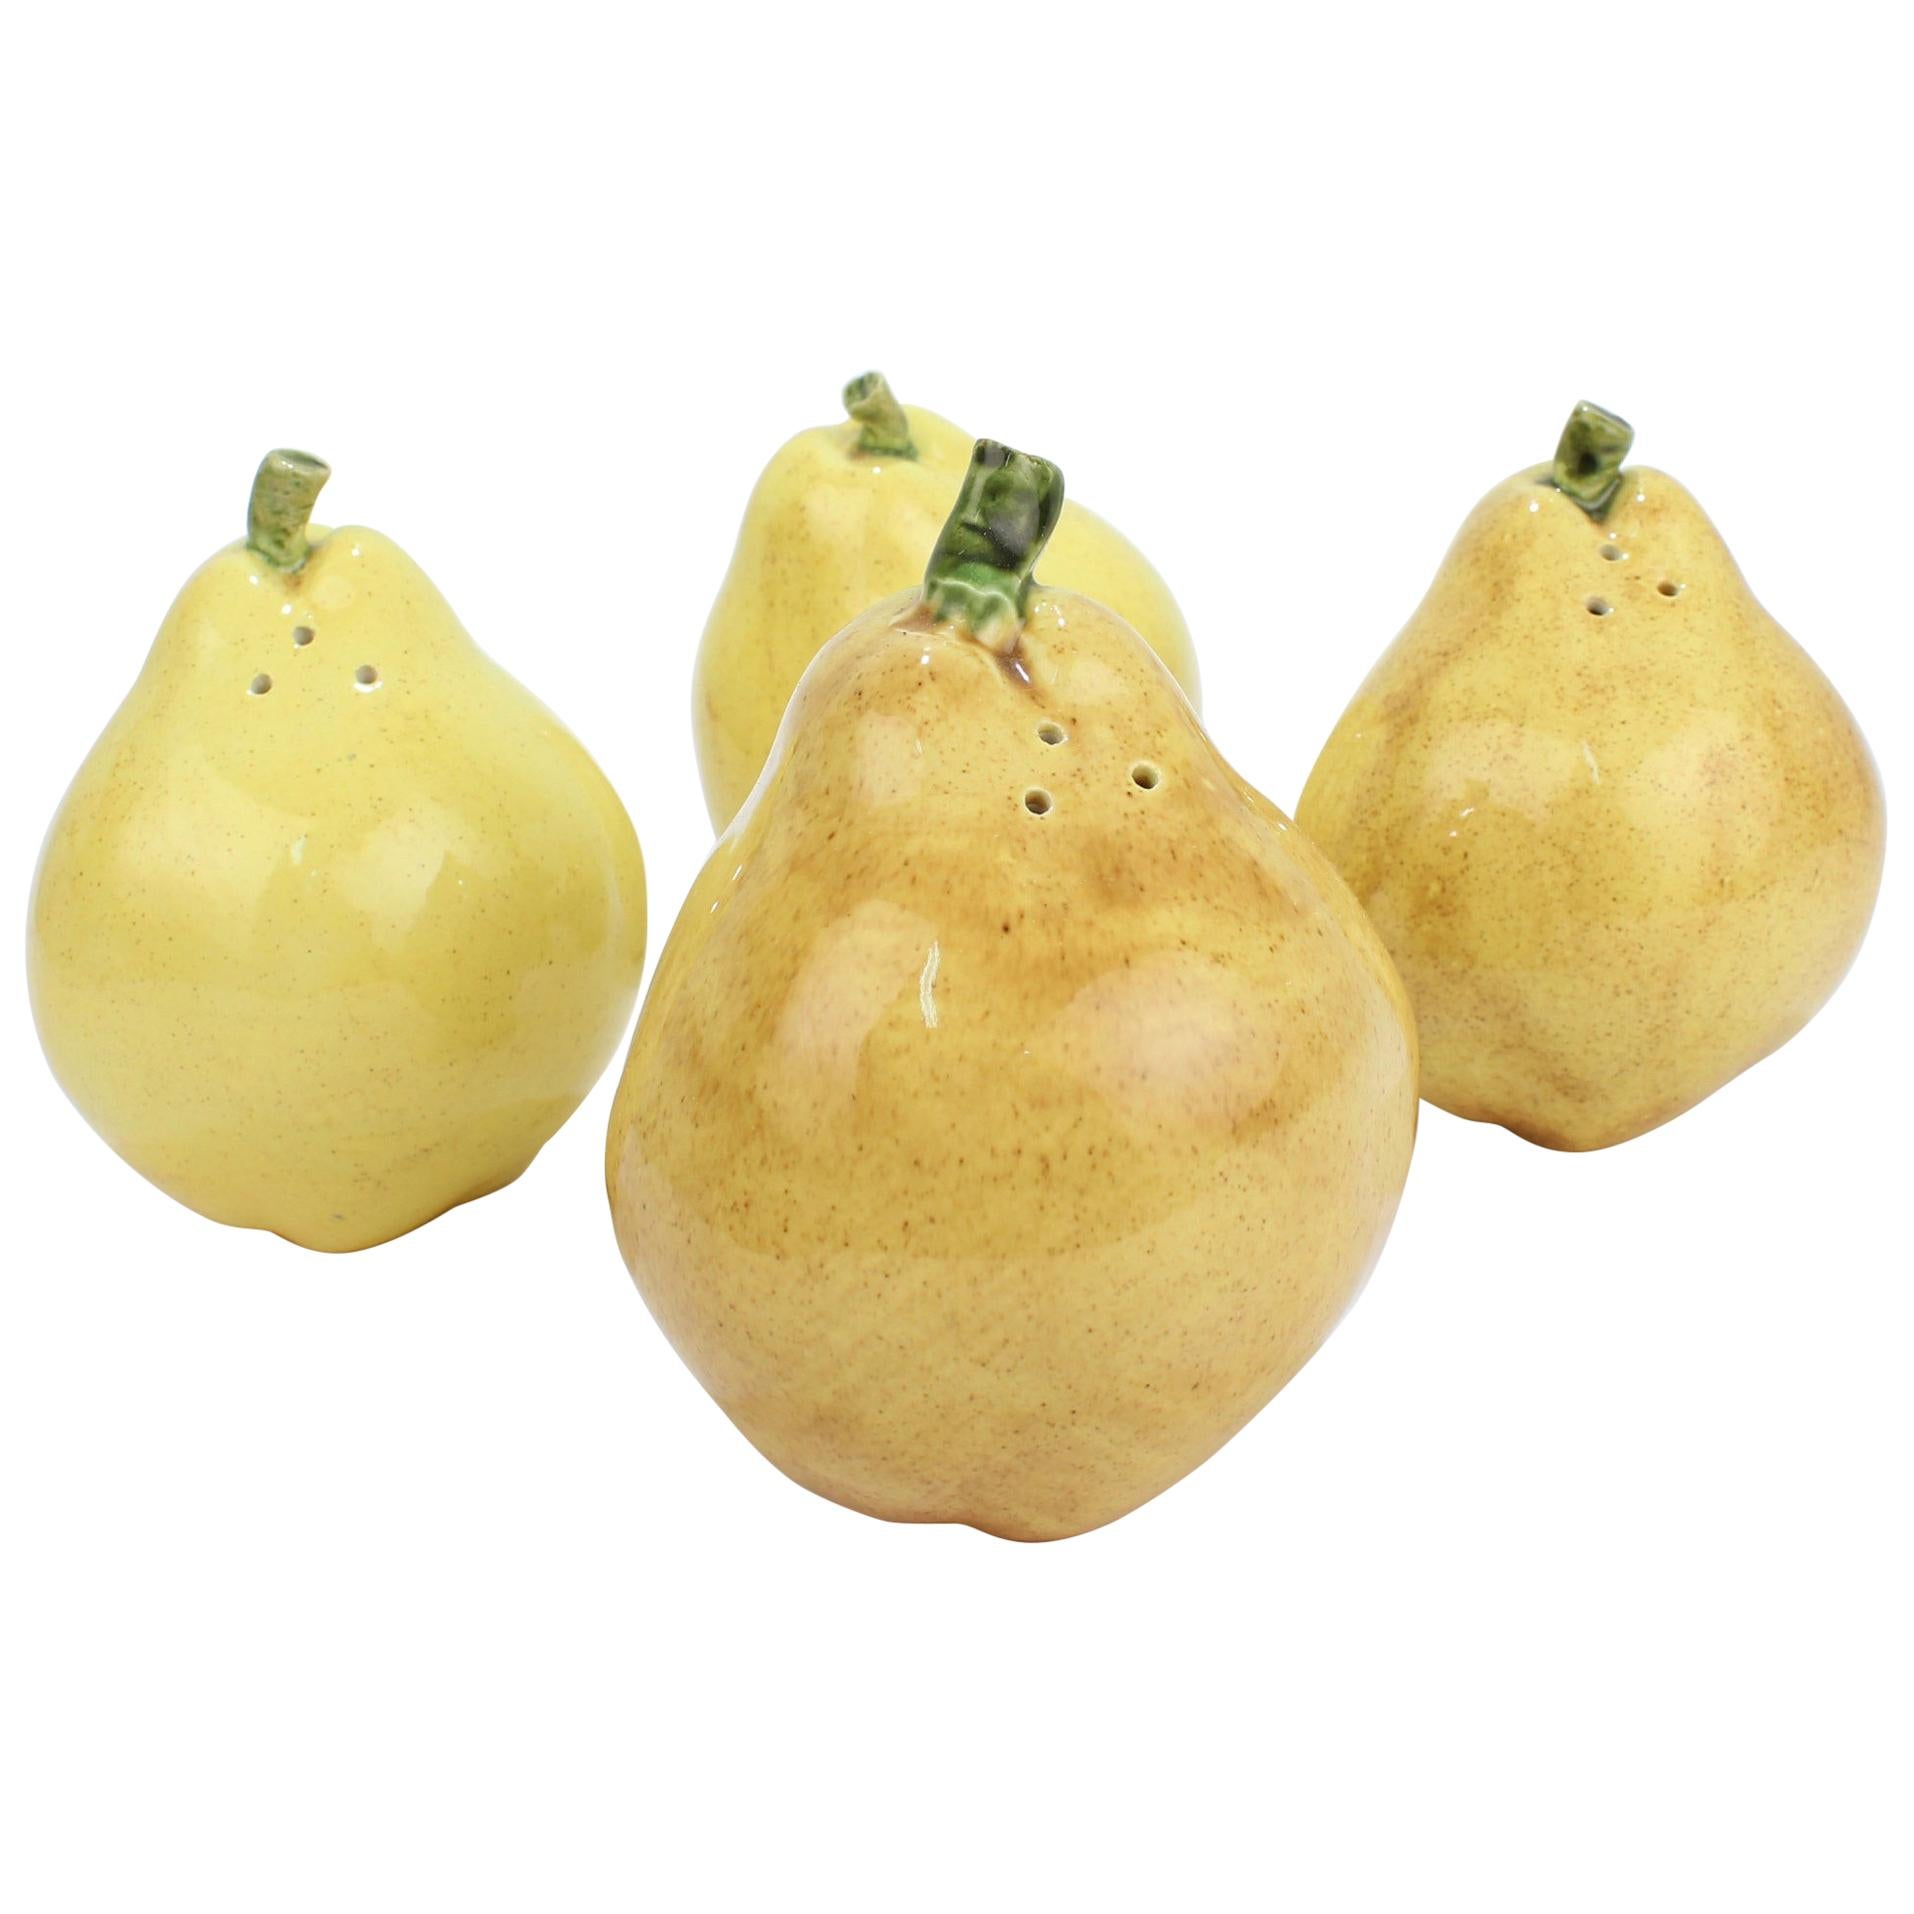 2 Pairs of Pear Shaped Yellow Pottery Salt and Pepper Shakers